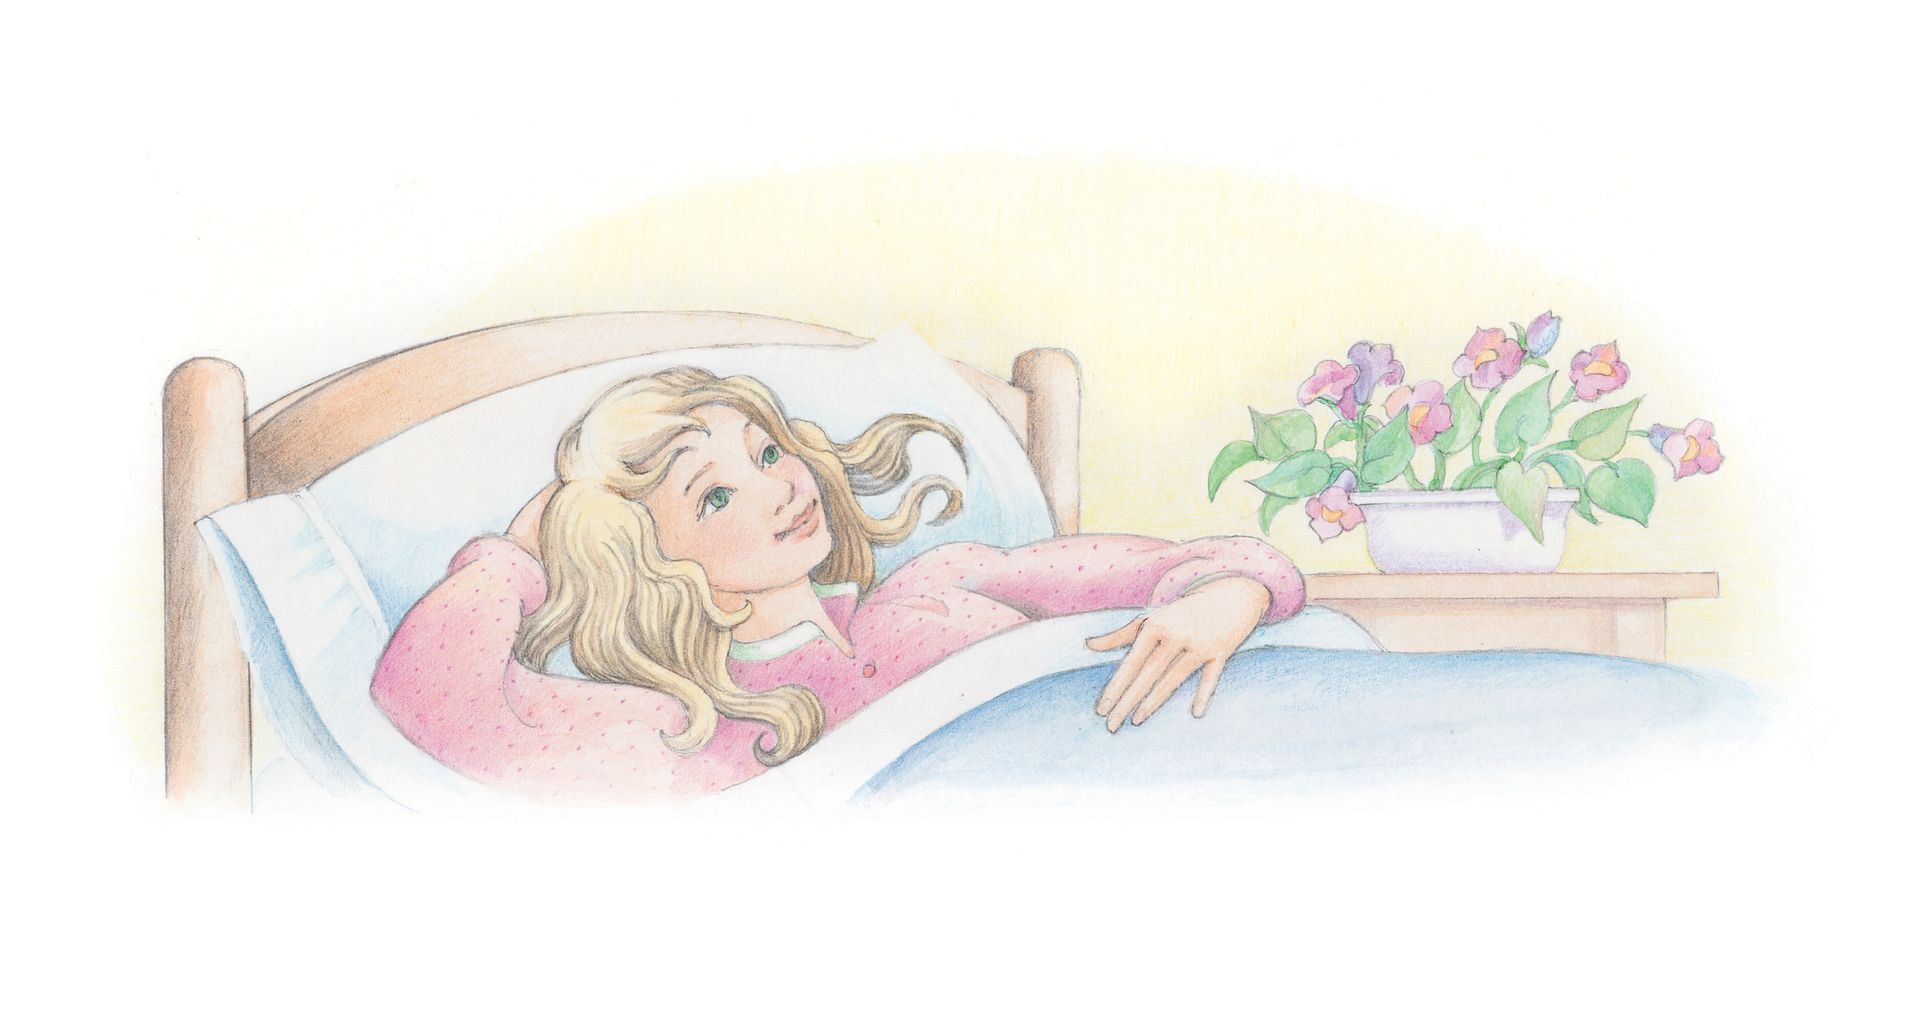 A girl lying in bed contemplating her day. From the Children’s Songbook, page 11, “I’m Thankful to Be Me”; watercolor illustration by Phyllis Luch.